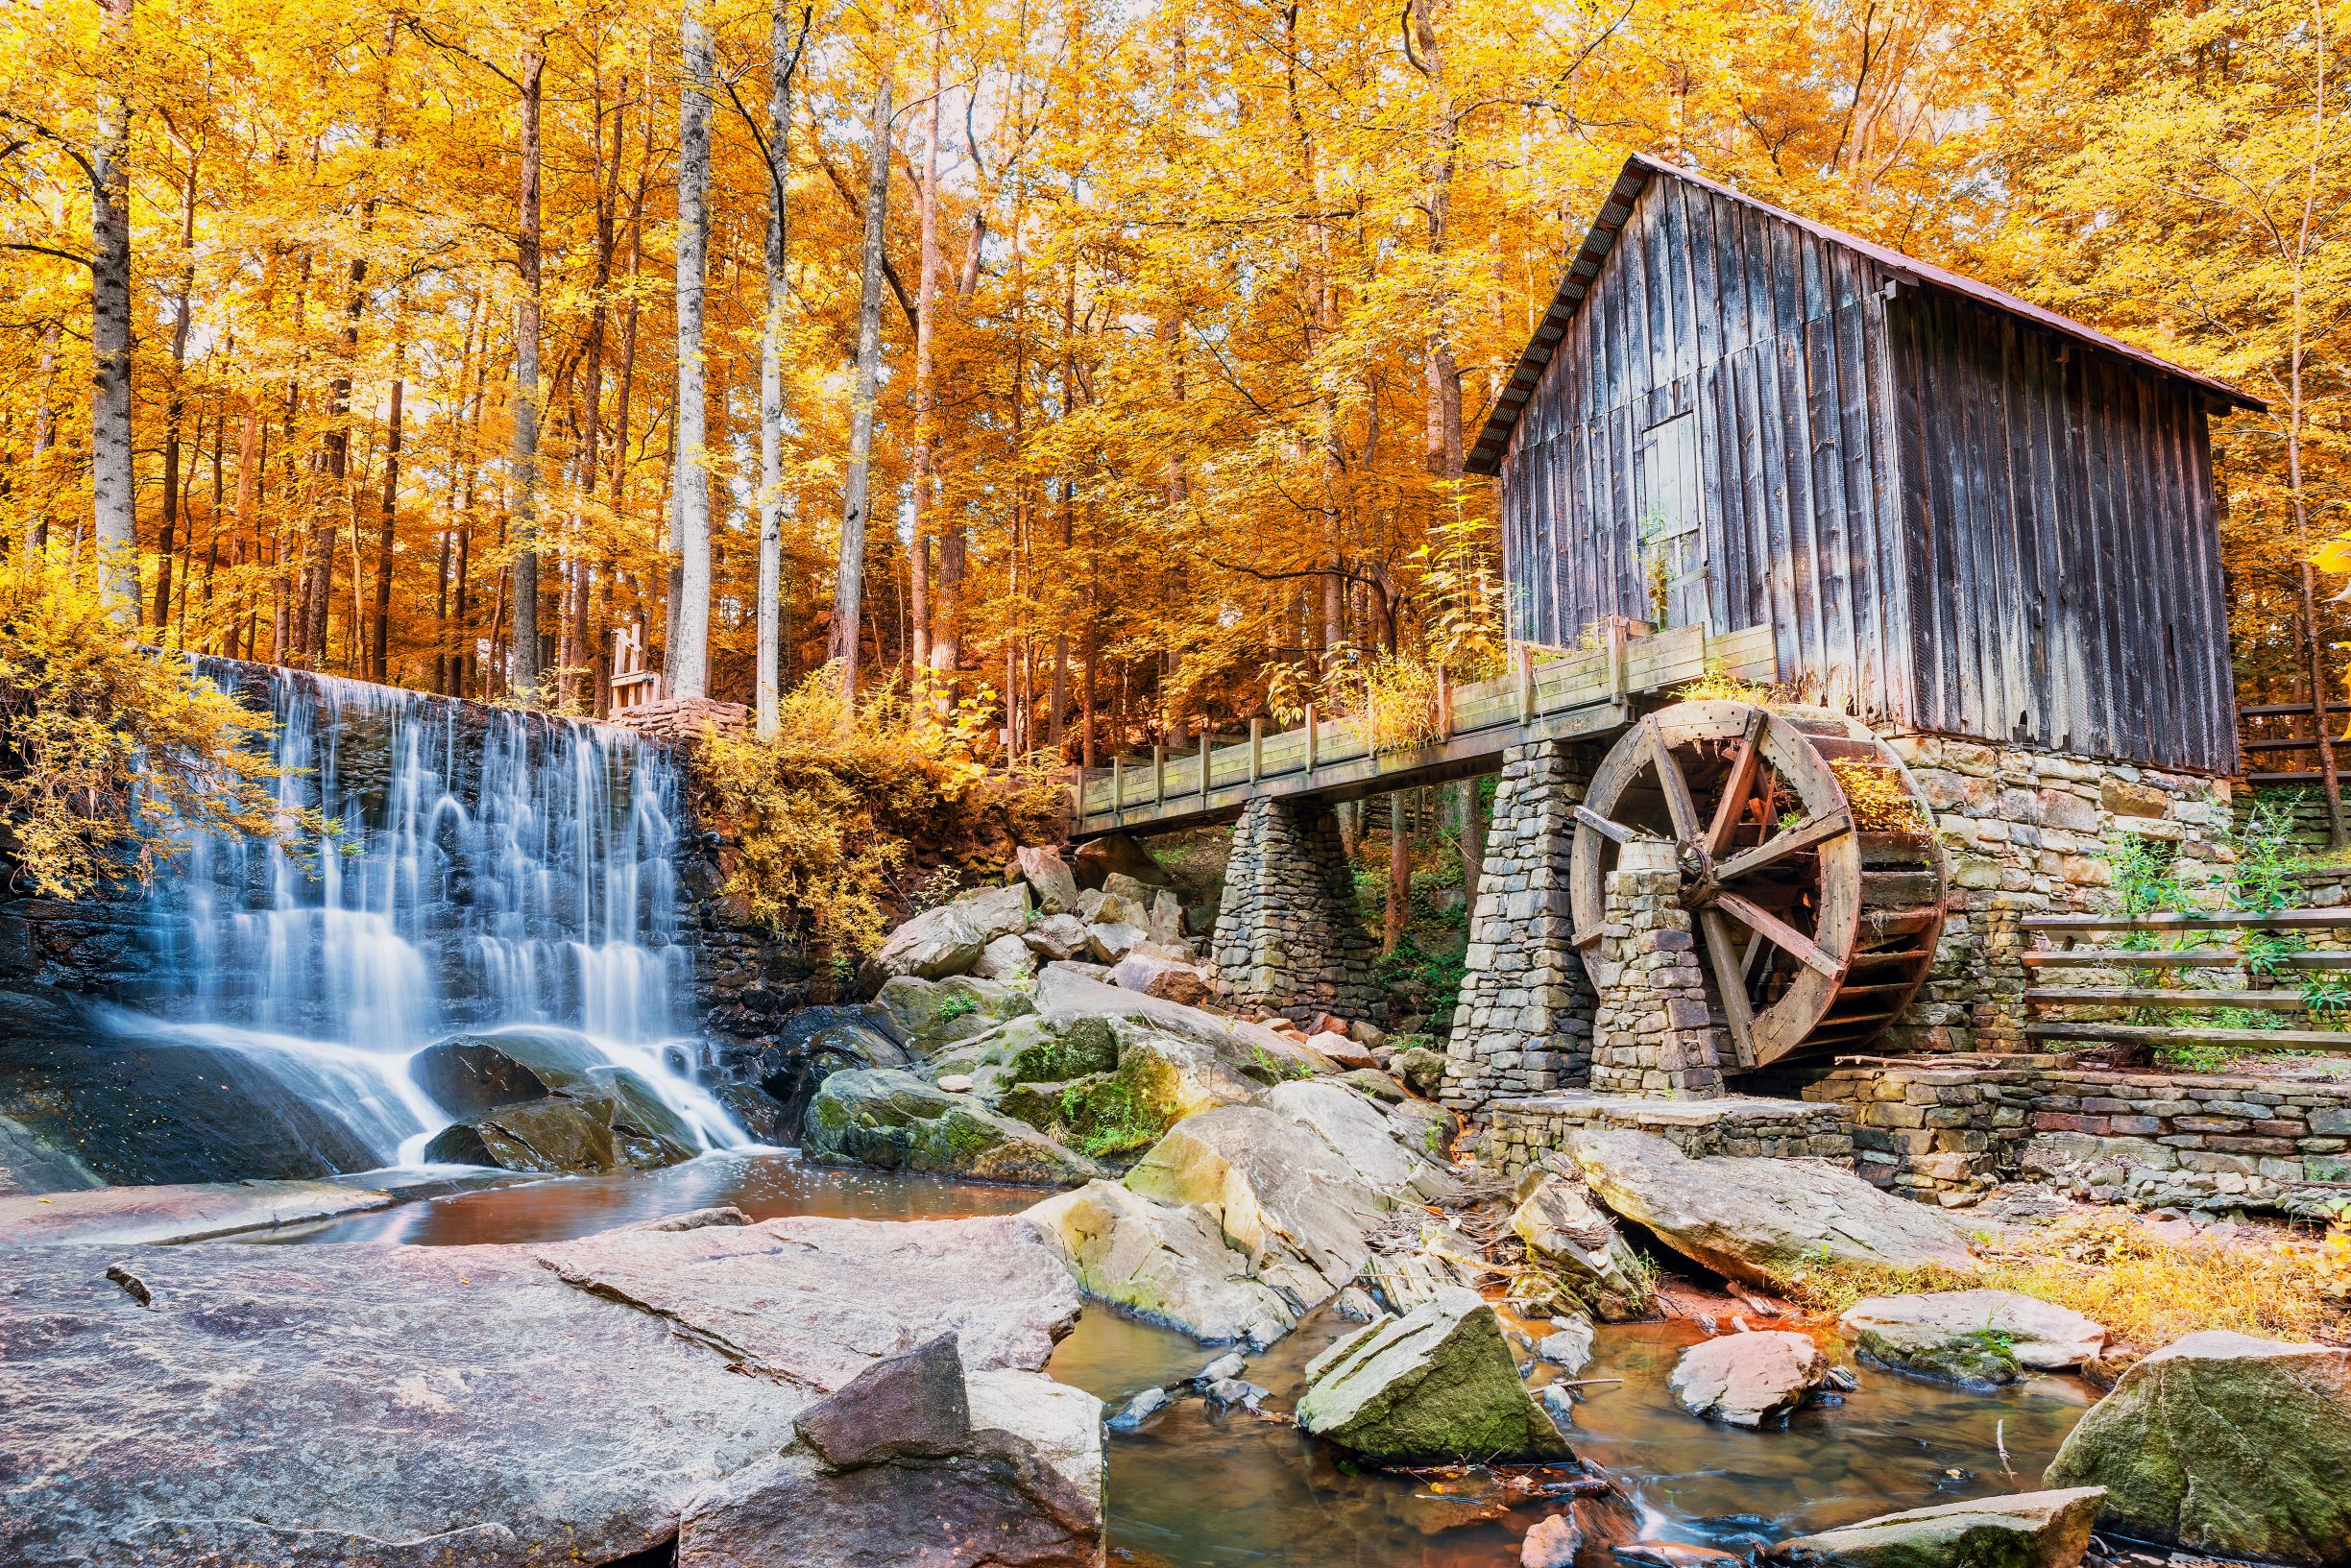 Photo of a historic mill and a waterfall in Marietta Georgia, one of the best places to experience Fall in Georgia.